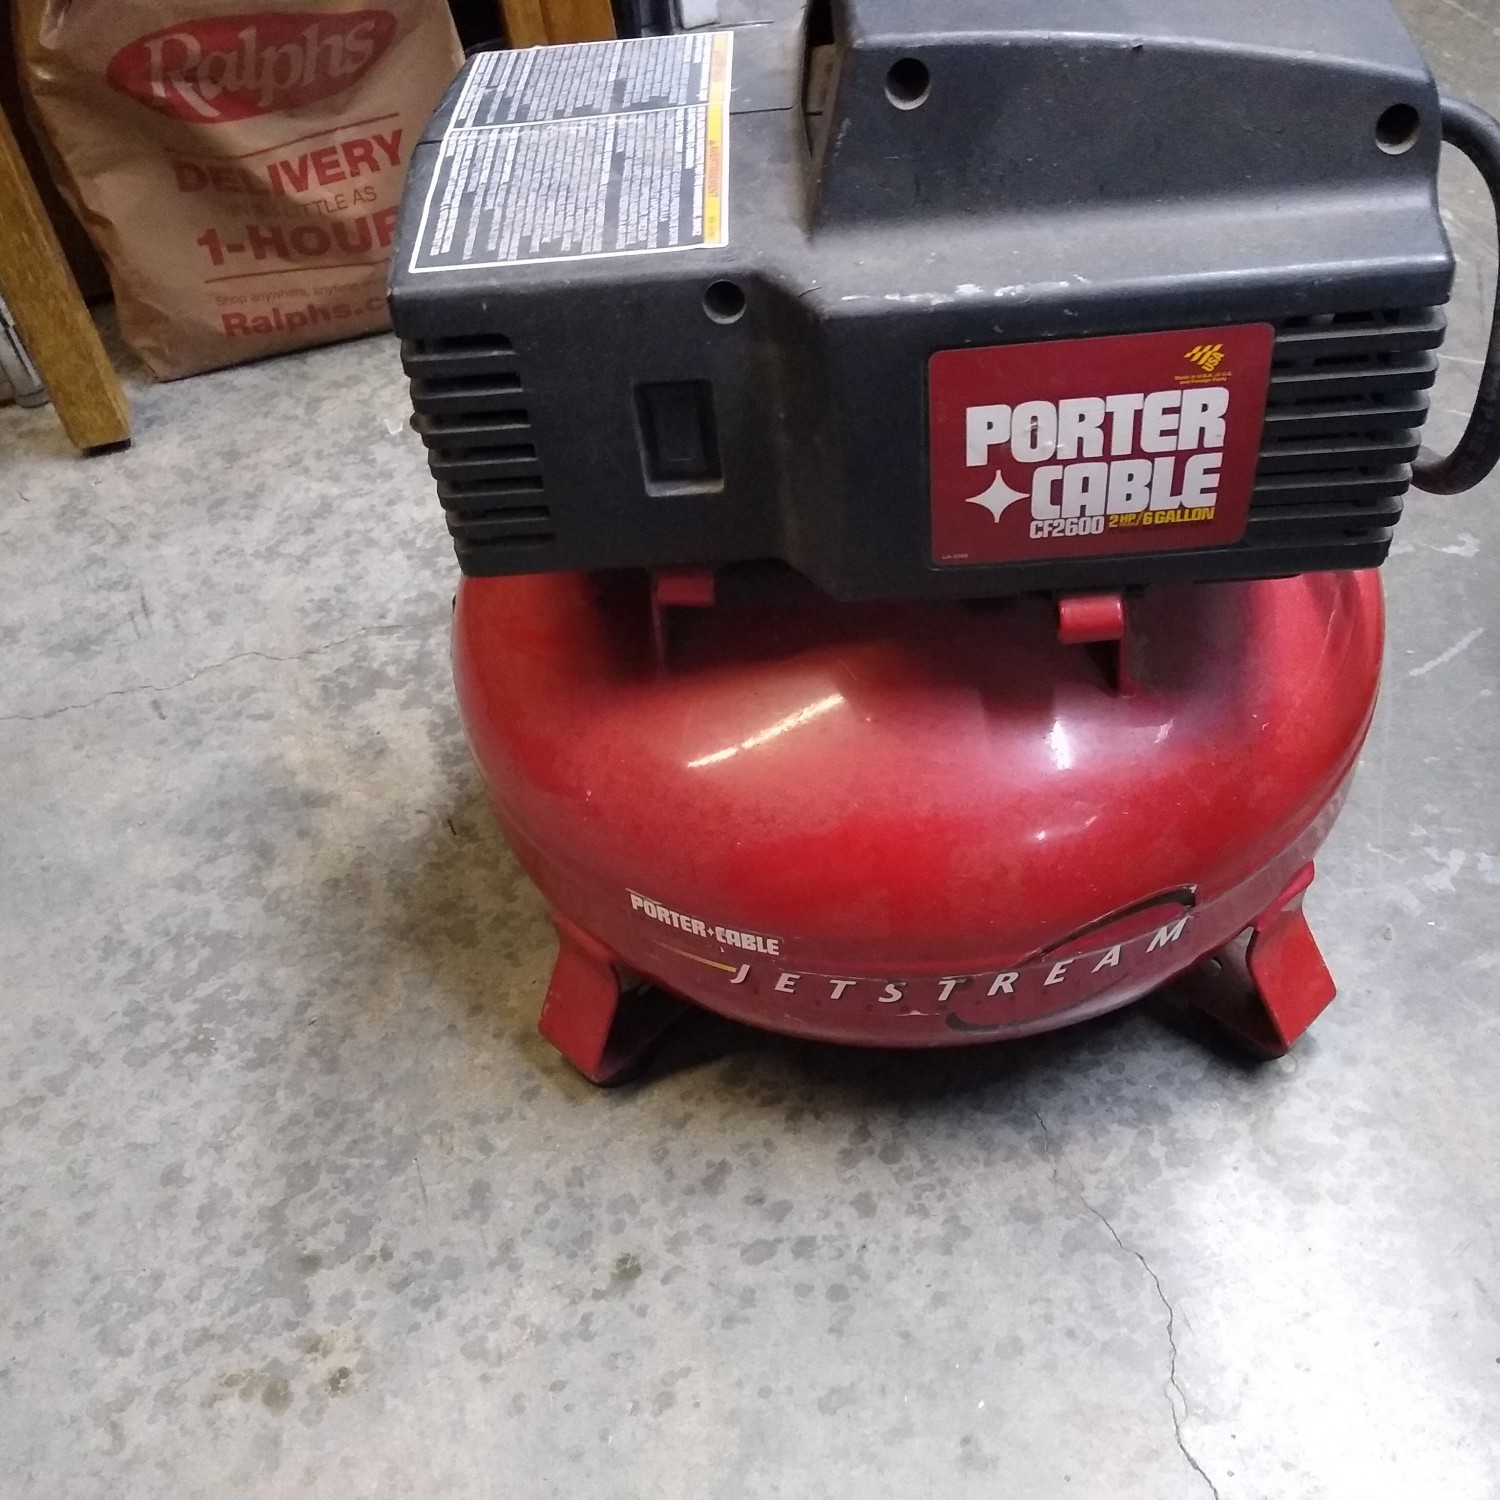 Porter Cable 6 gallon compressor. Works great.